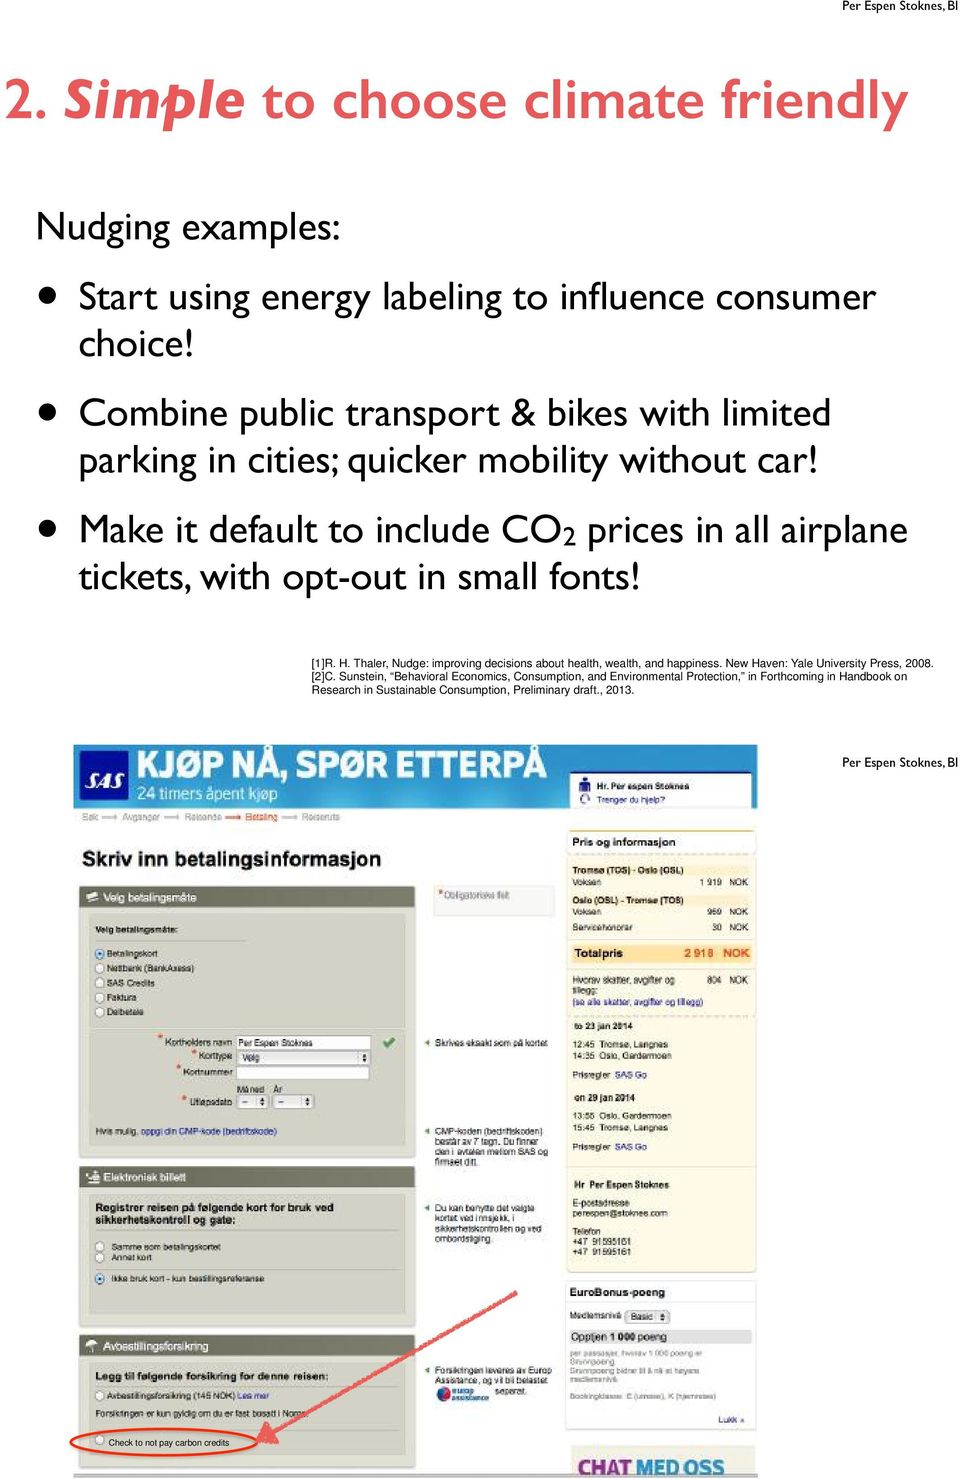 ! Make it default to include CO2 prices in all airplane tickets, with opt-out in small fonts! [1]R. H.